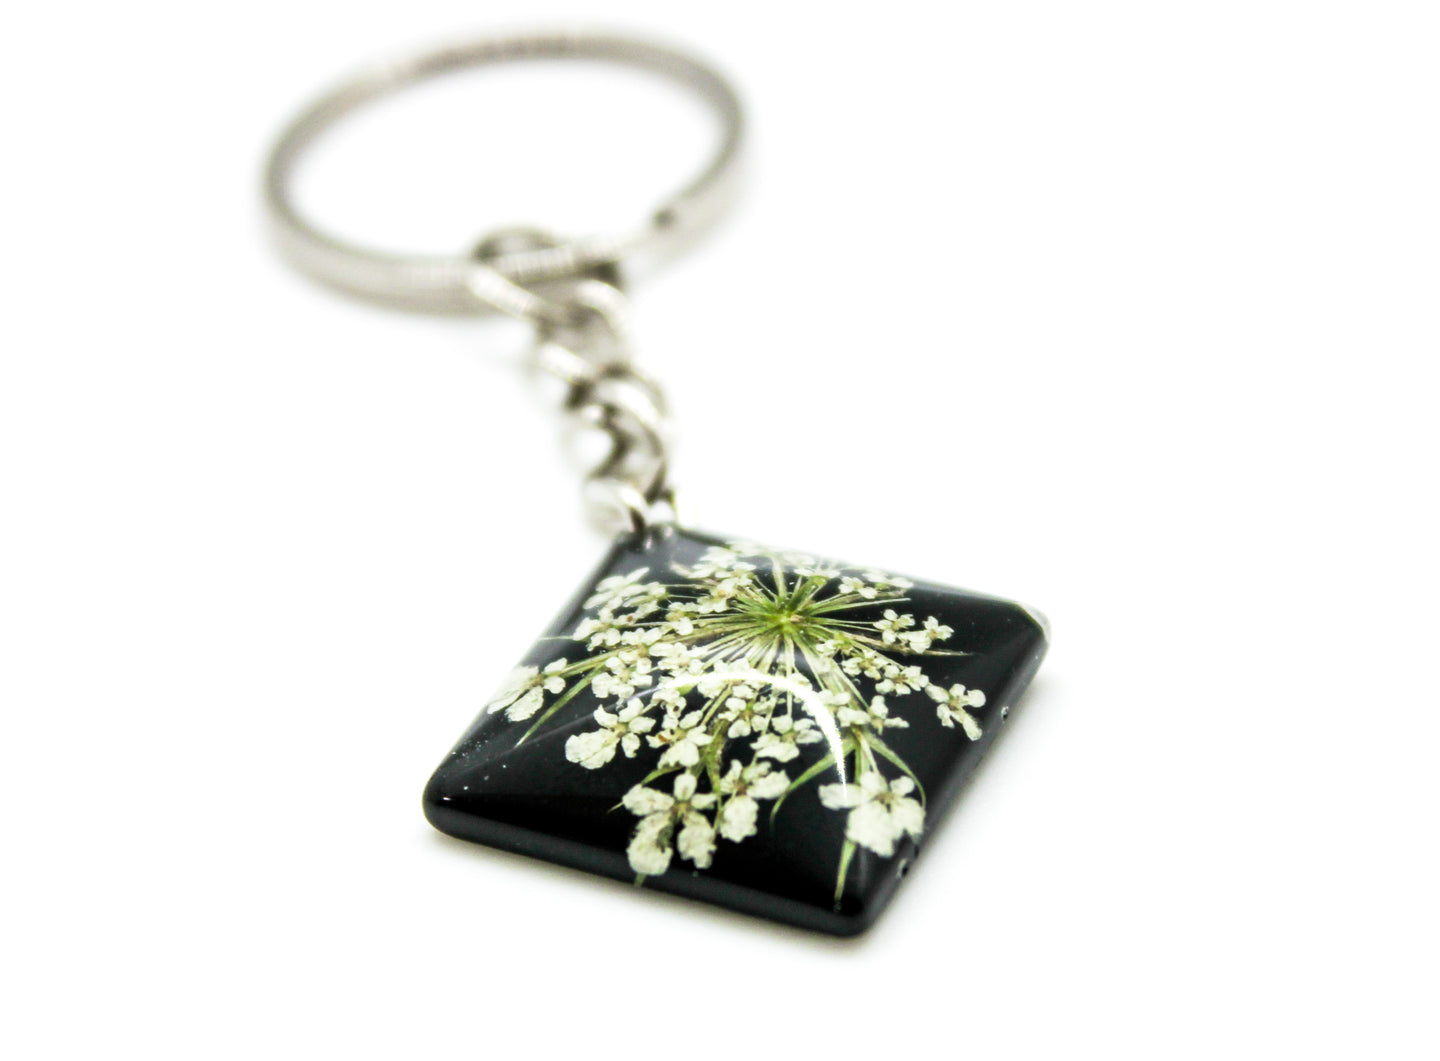 Queen Anne’s Lace square keychain